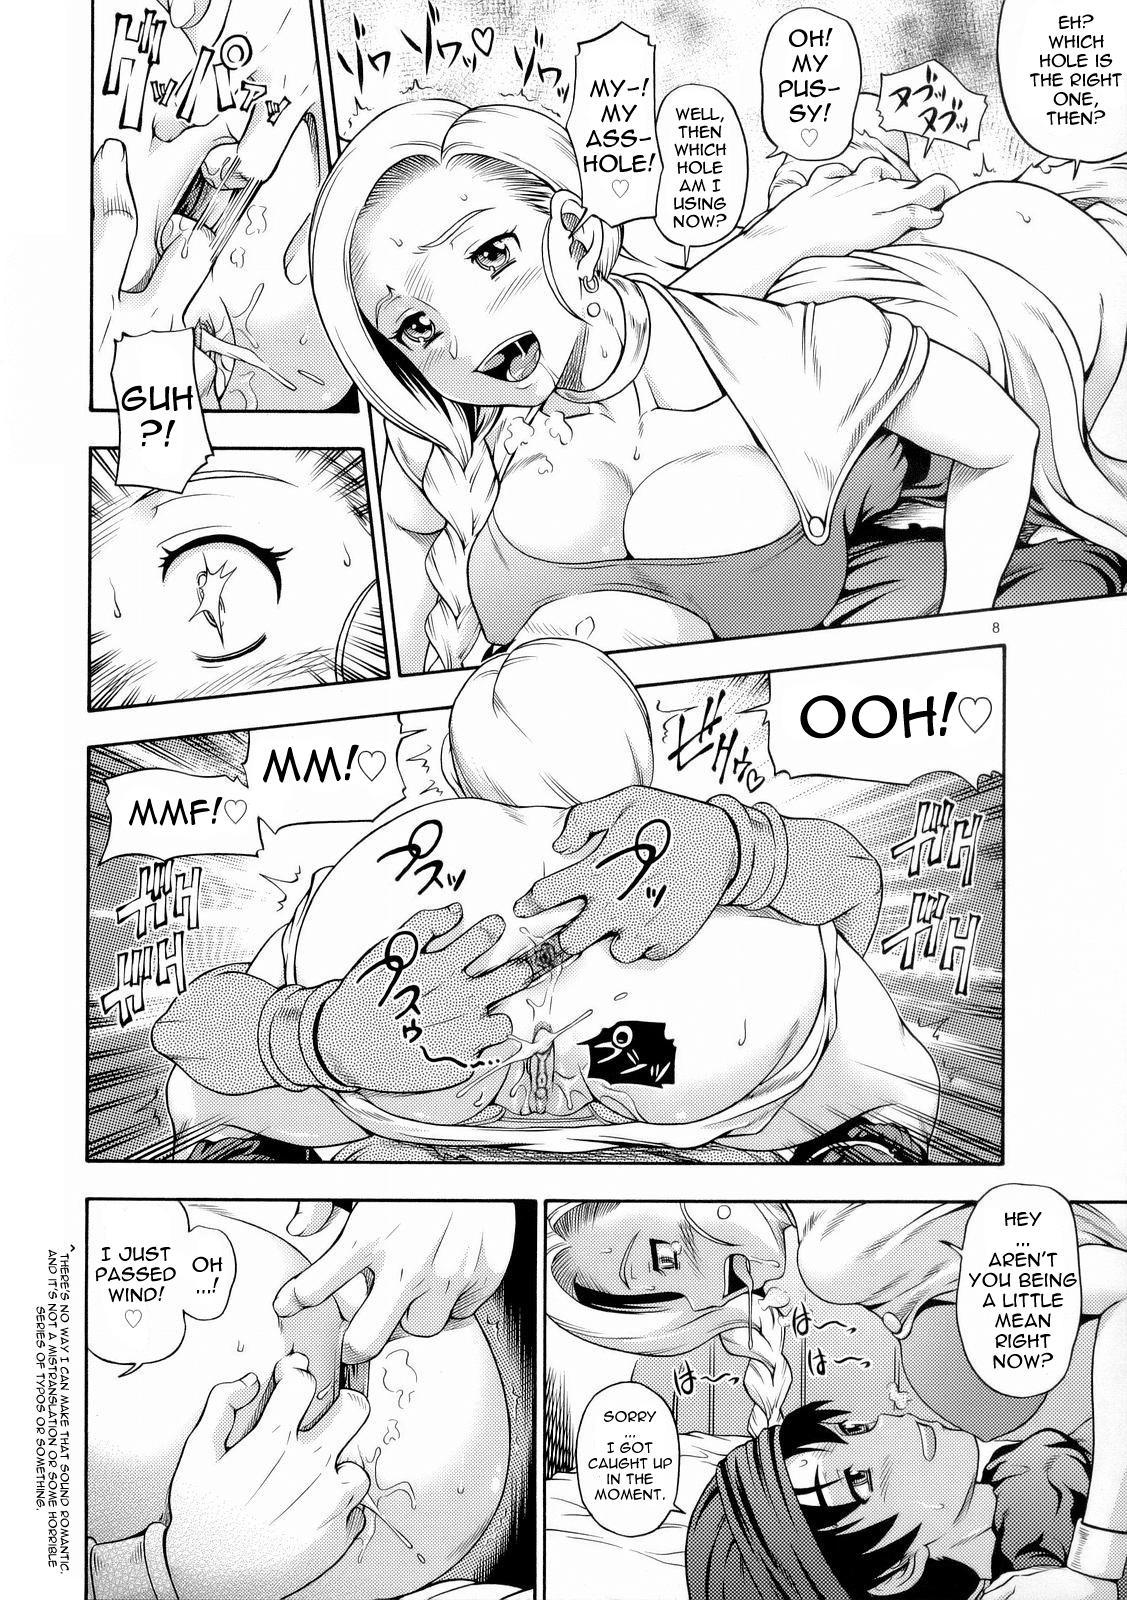 Gay Rimming Bianca Milk 5.1 - Dragon quest v Outdoor - Page 6